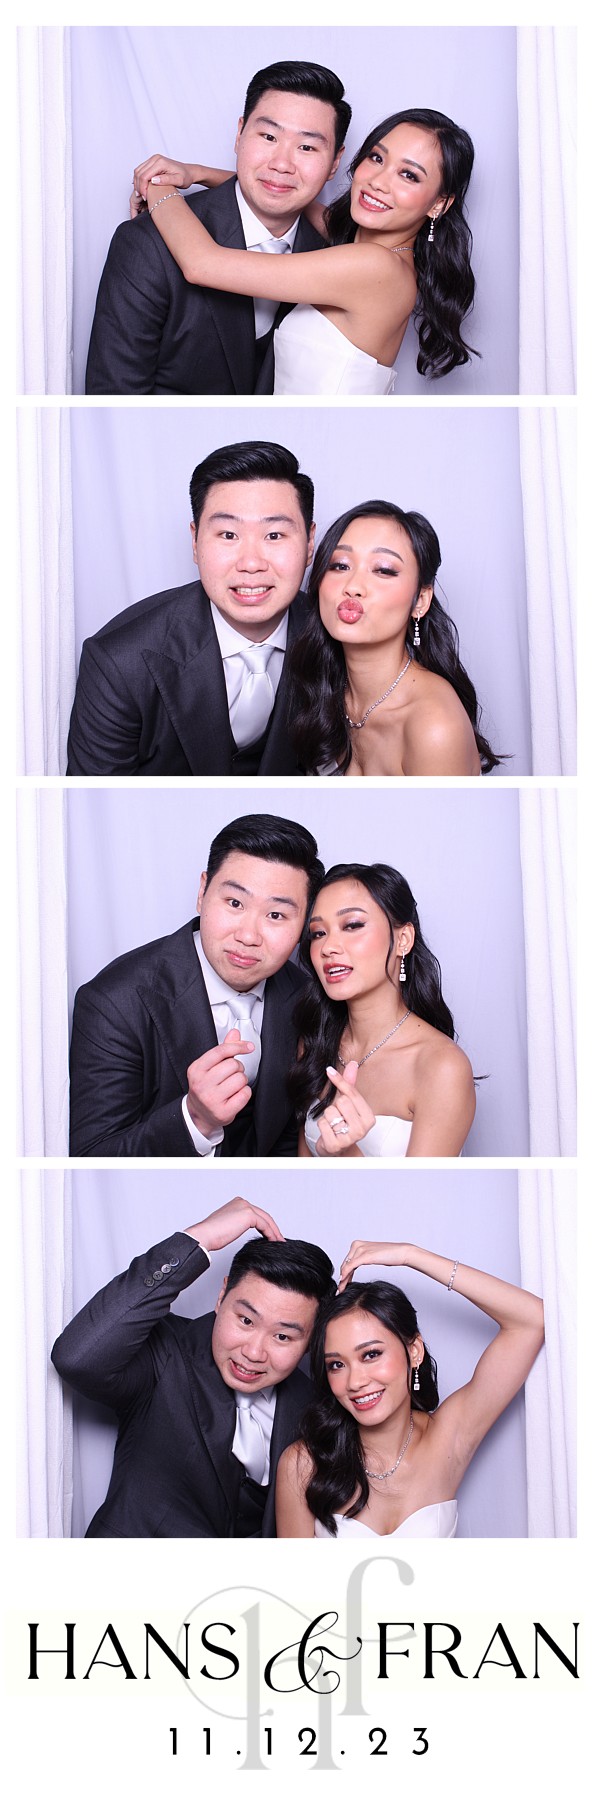 Hans and Fran’s Wedding – Vintage Booth